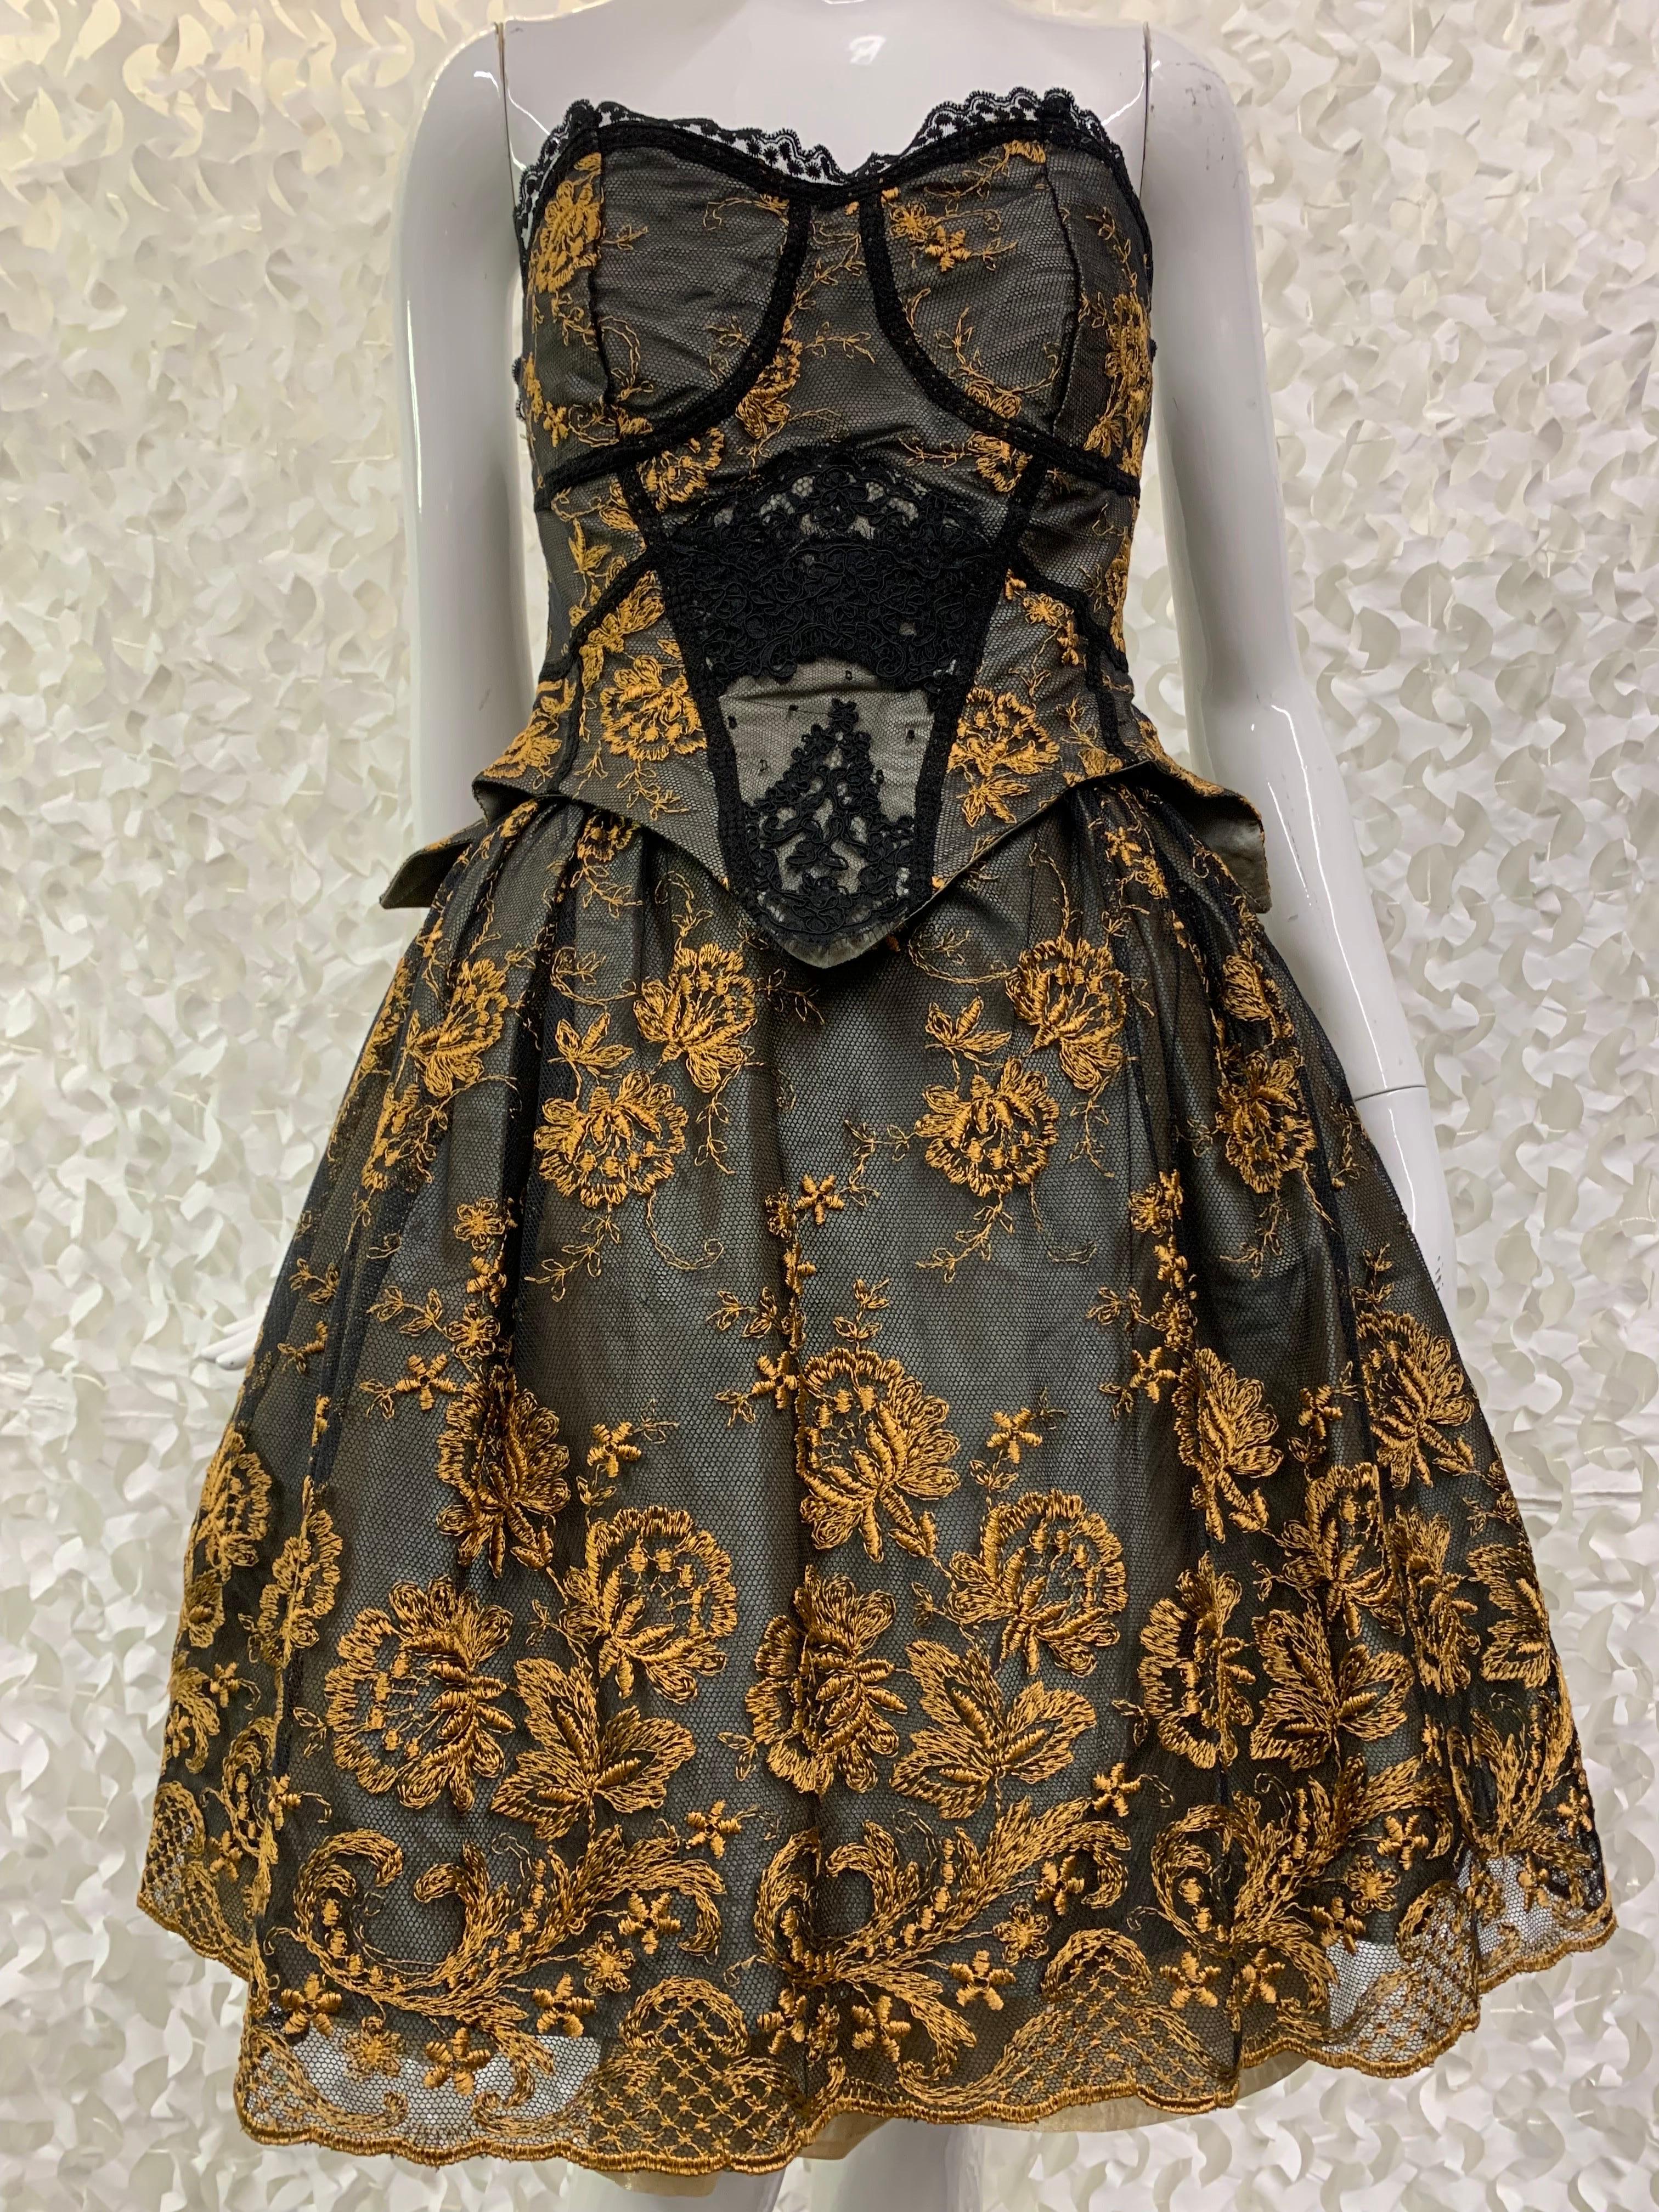 Women's 1990s Christian LaCroix Strapless Merry Widow Dress w Pouf Skirt in Black Lace For Sale